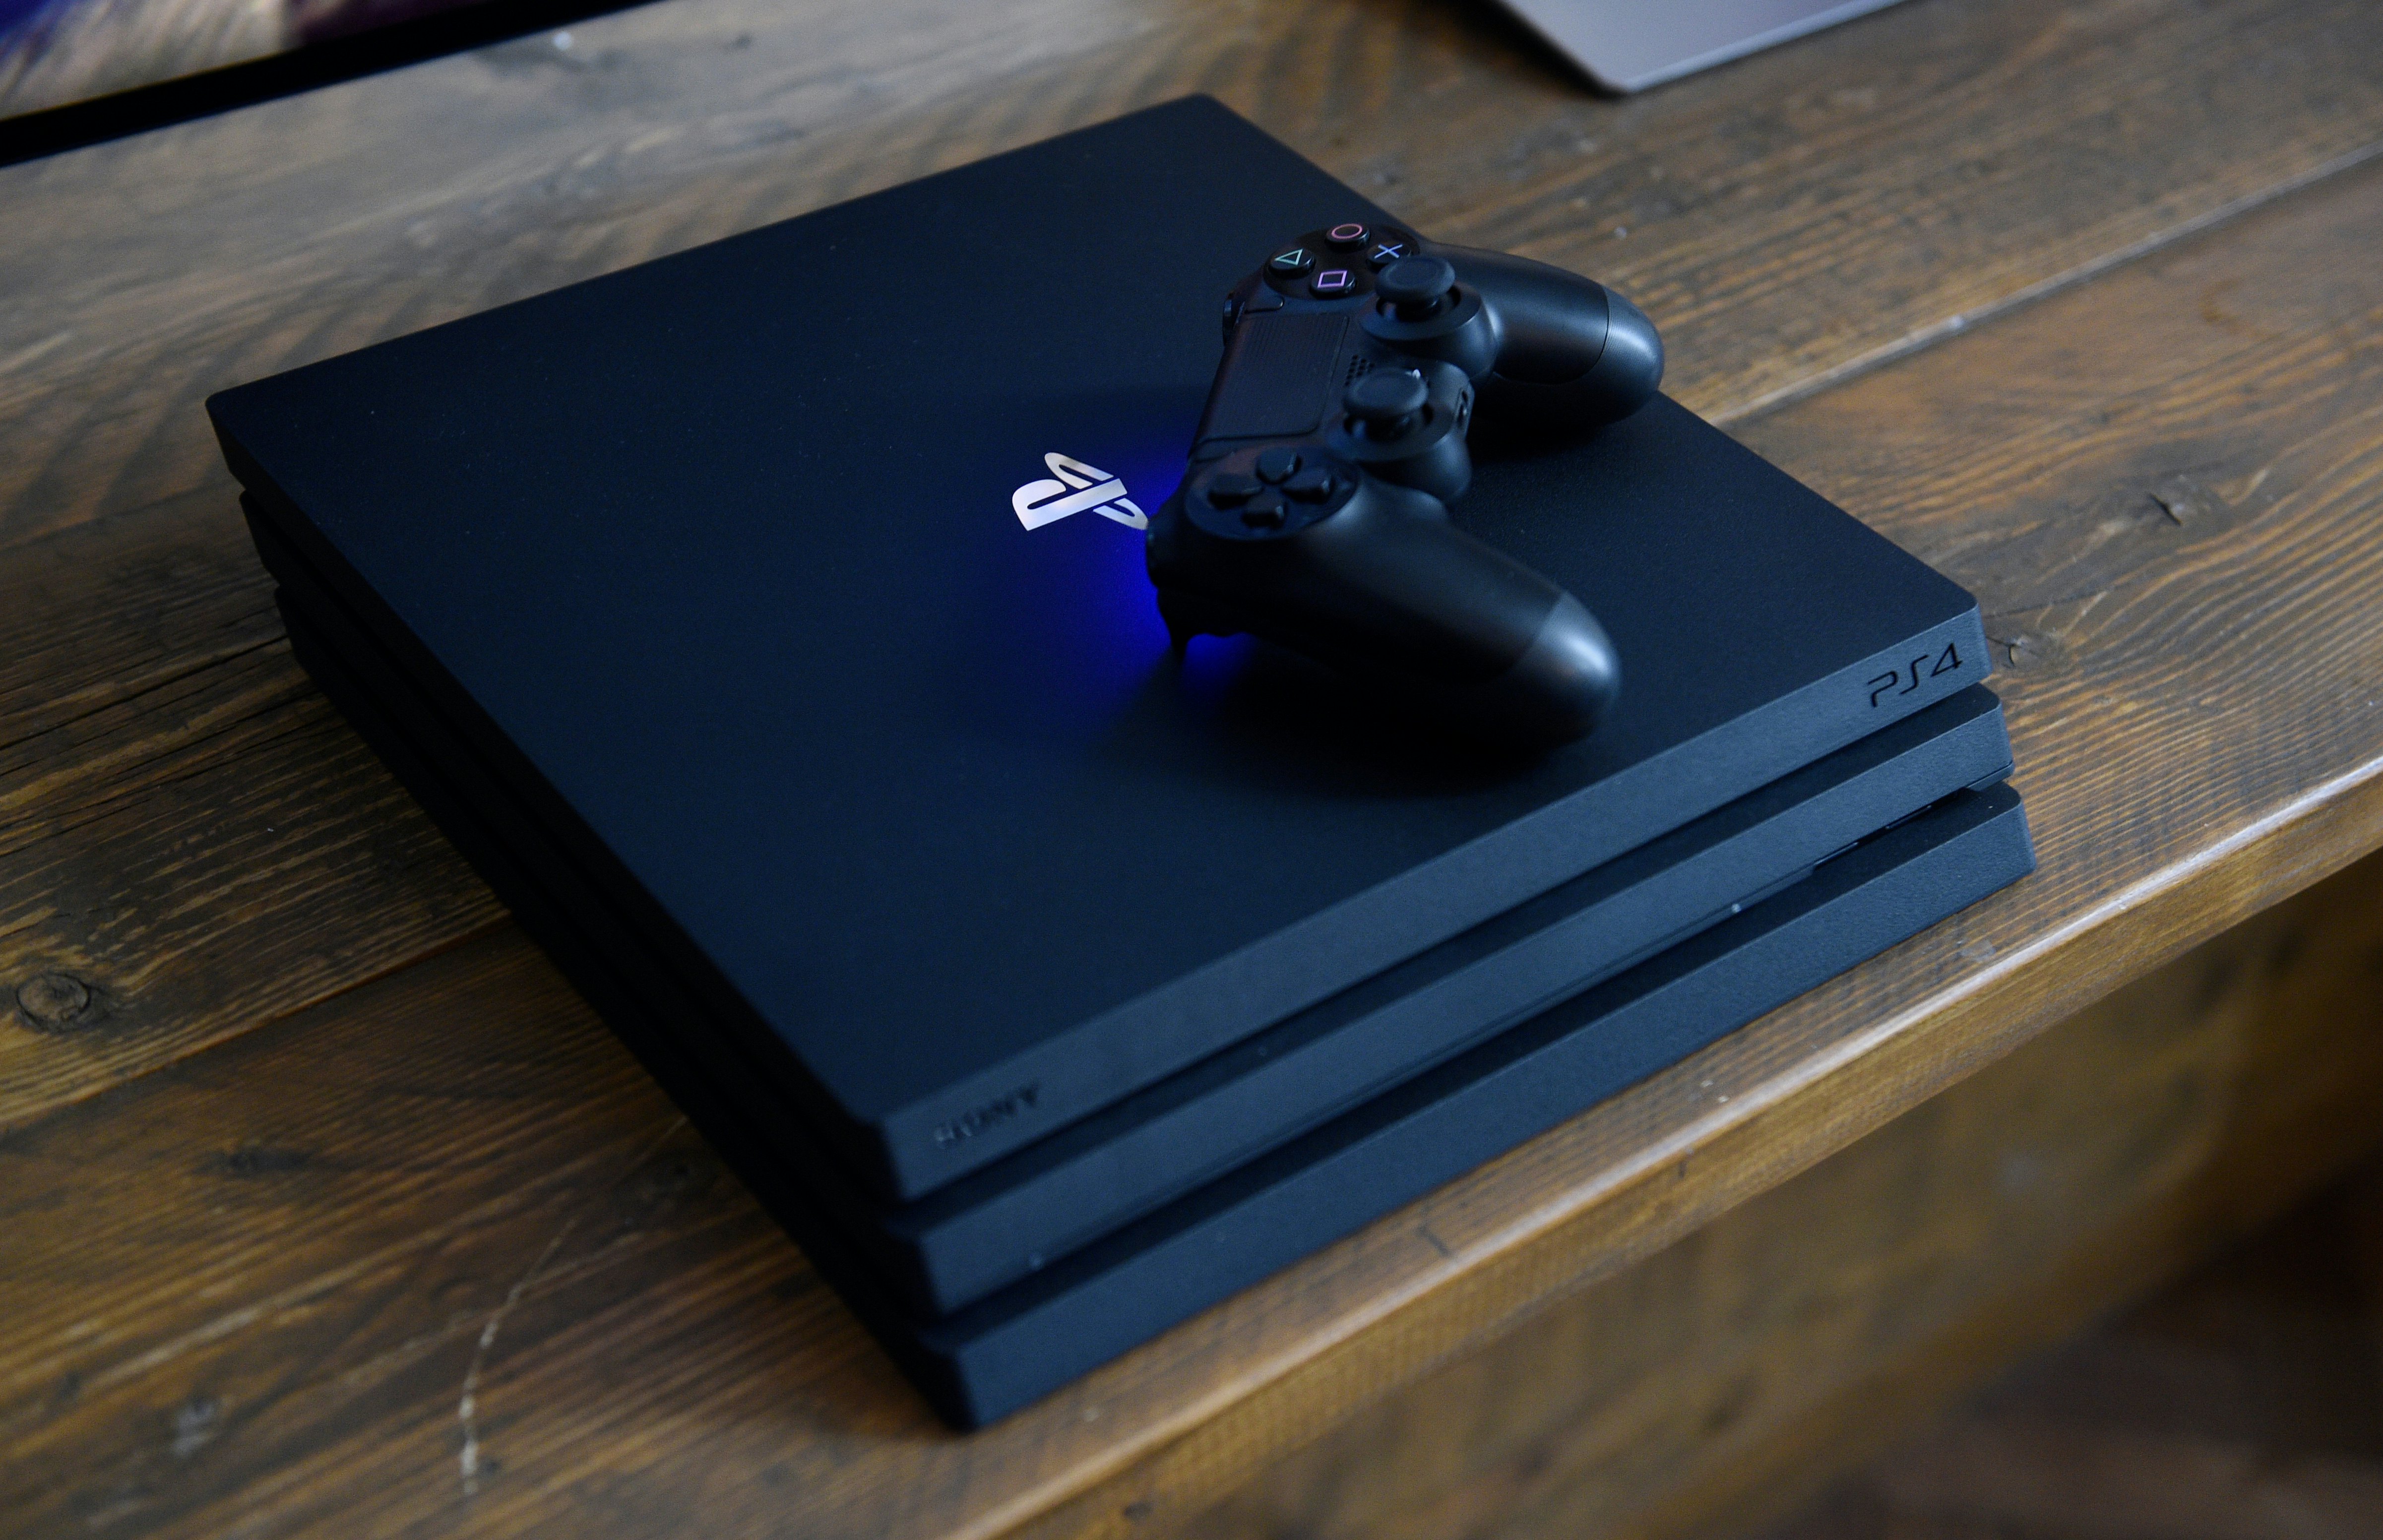 how much will cost the ps5